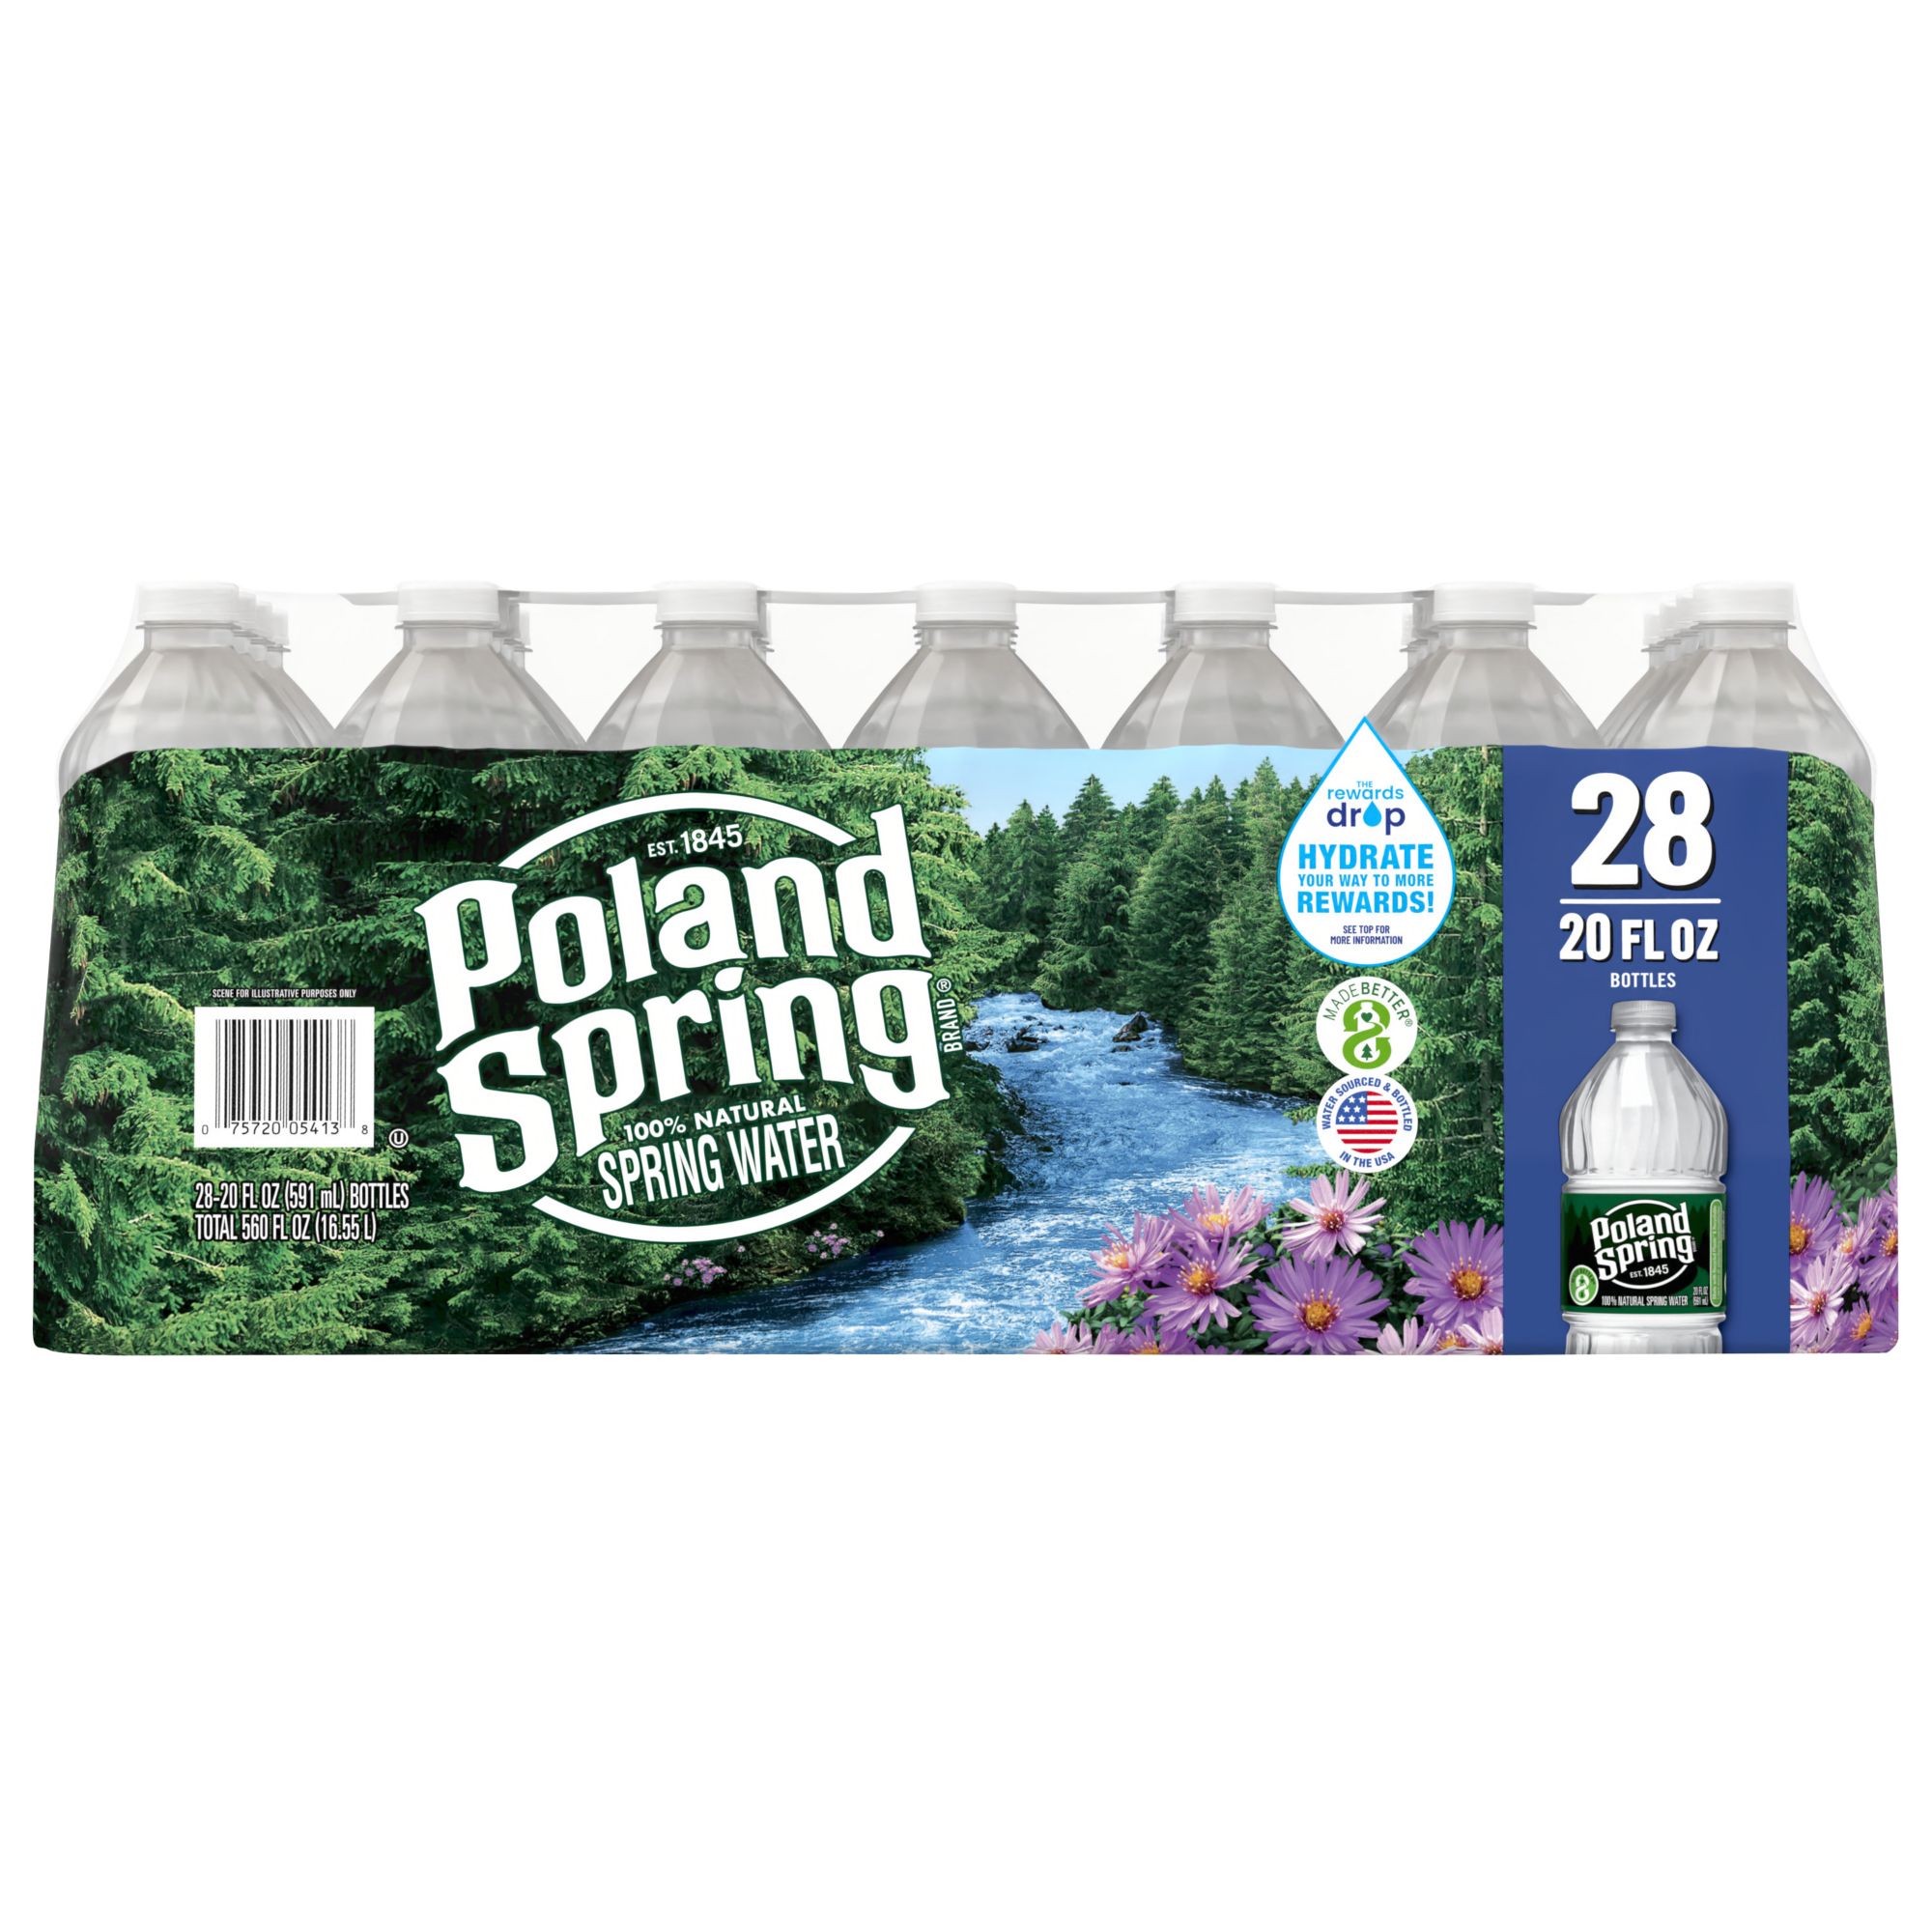 Poland Spring Water Bottle 16.9oz – Flavors NYC Inc